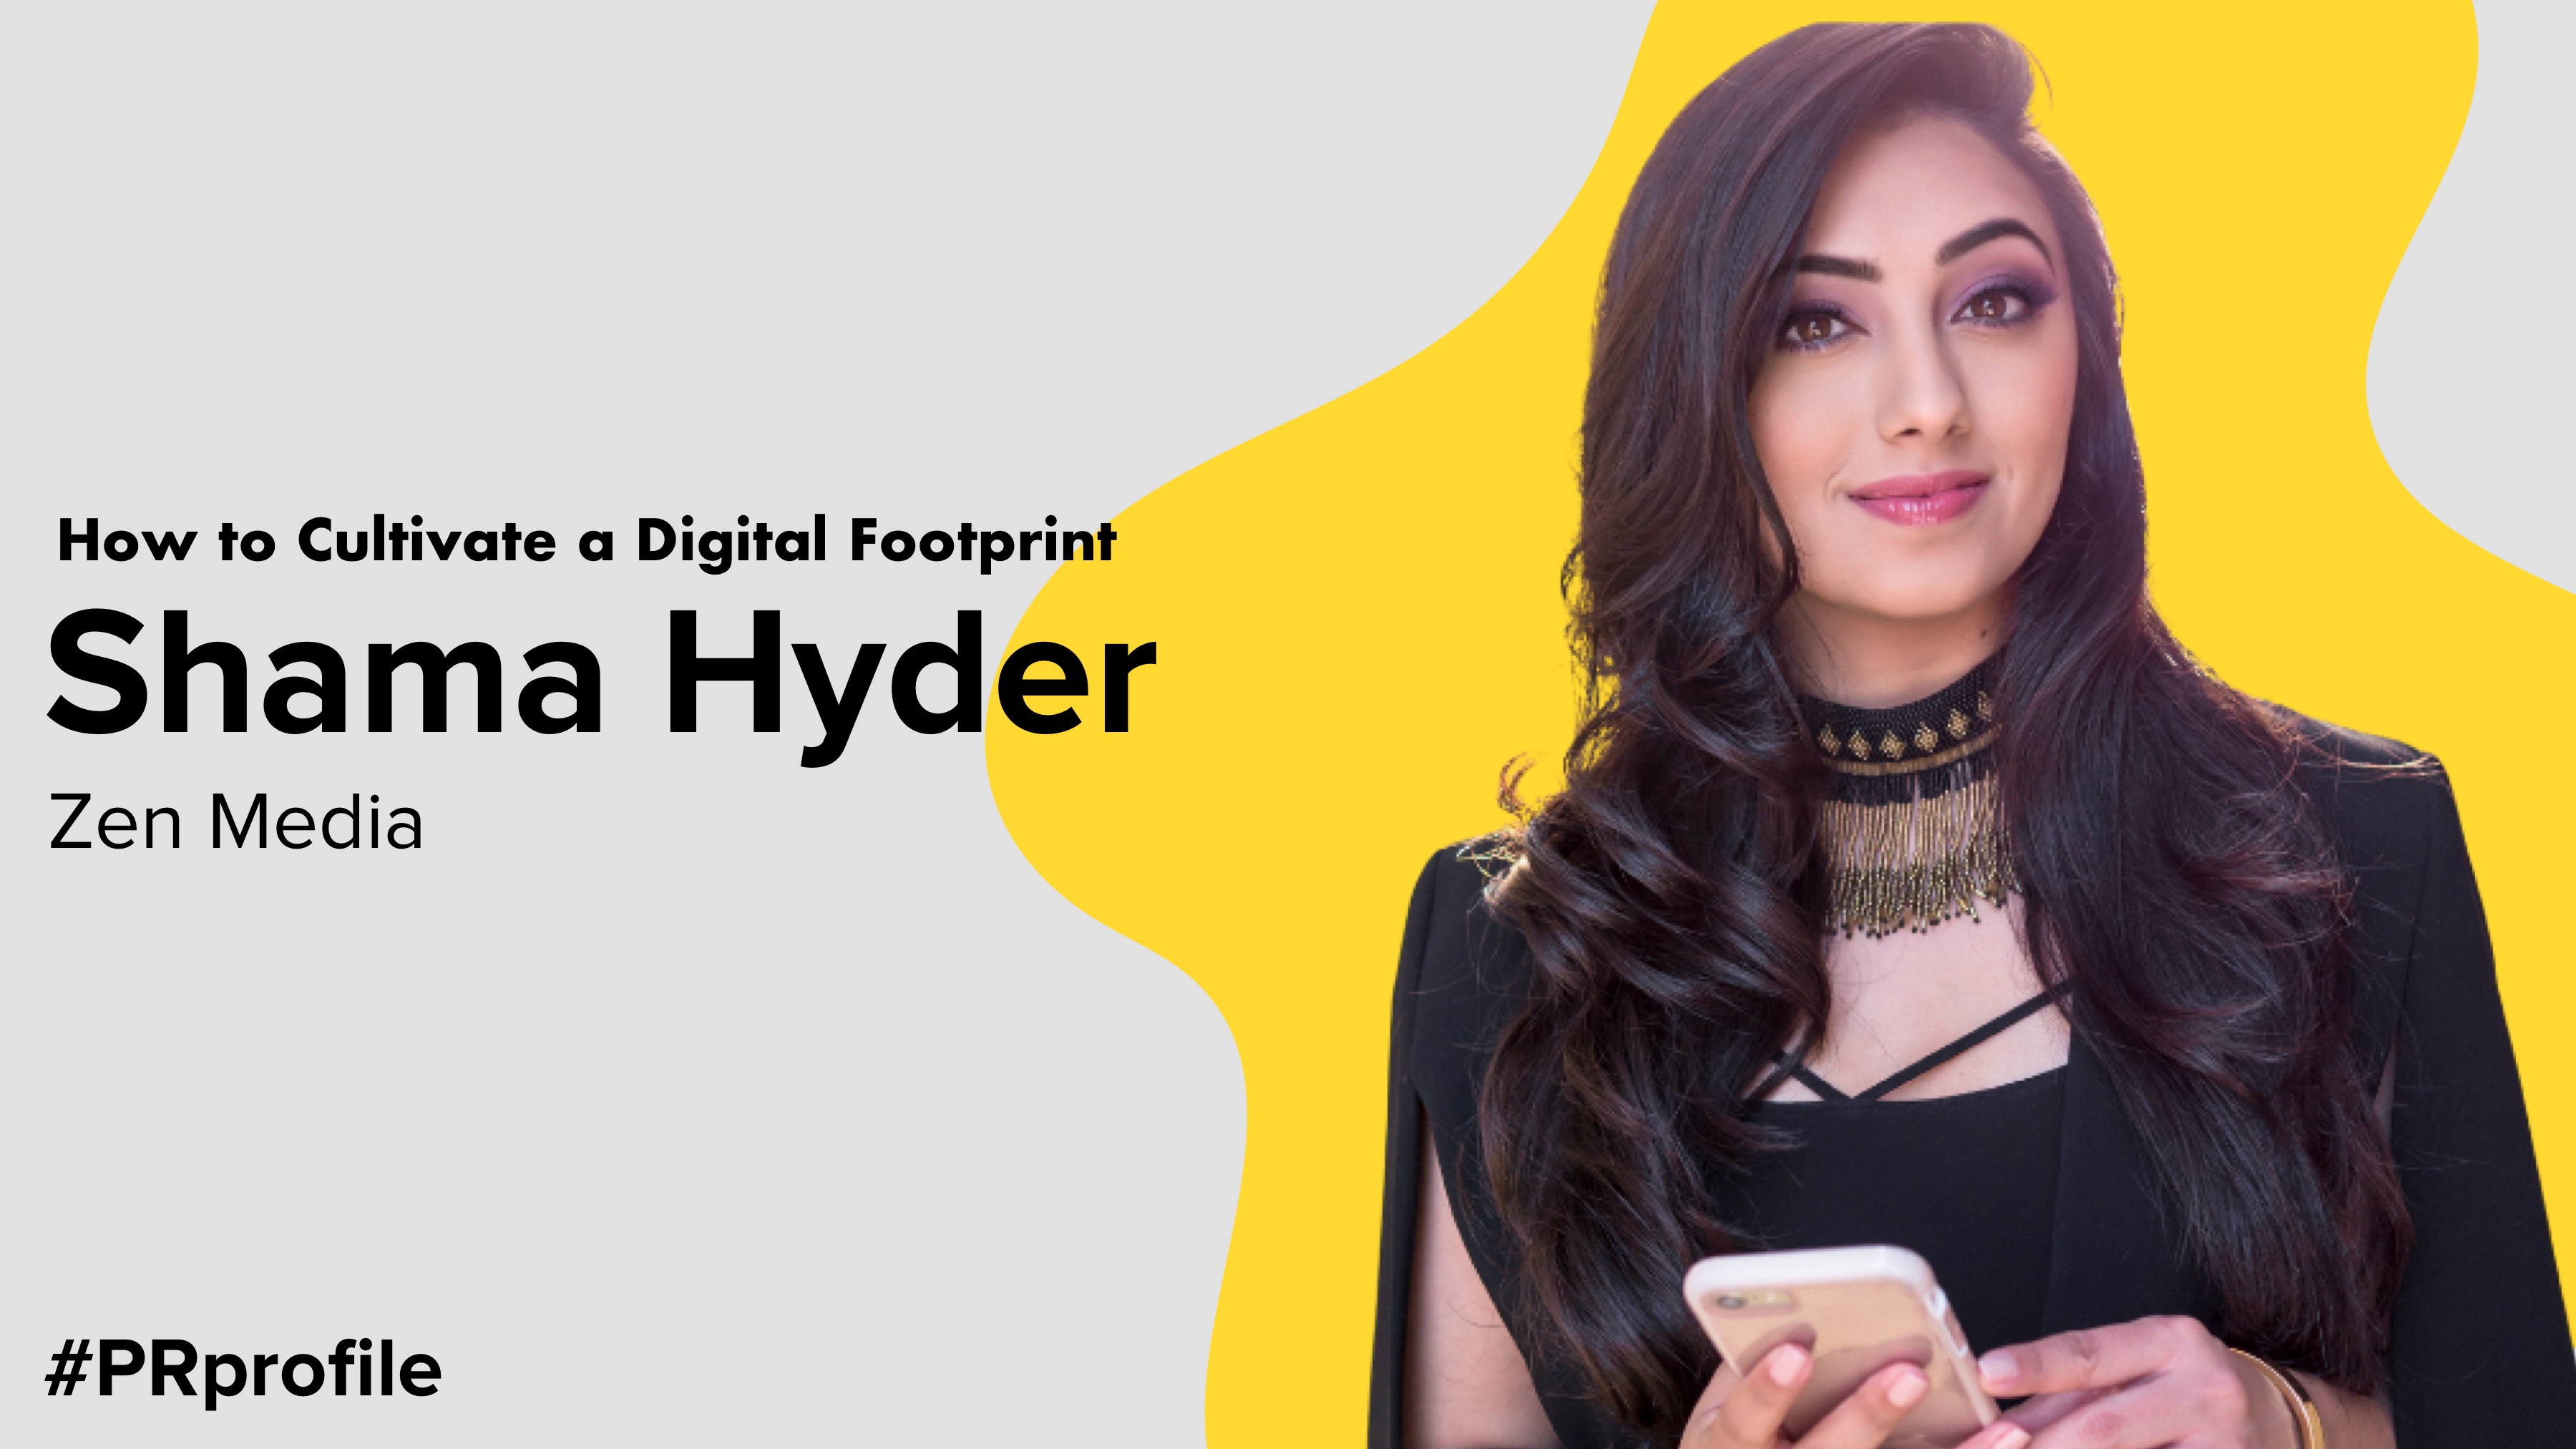 How to Cultivate a Digital Footprint with Shama Hyder